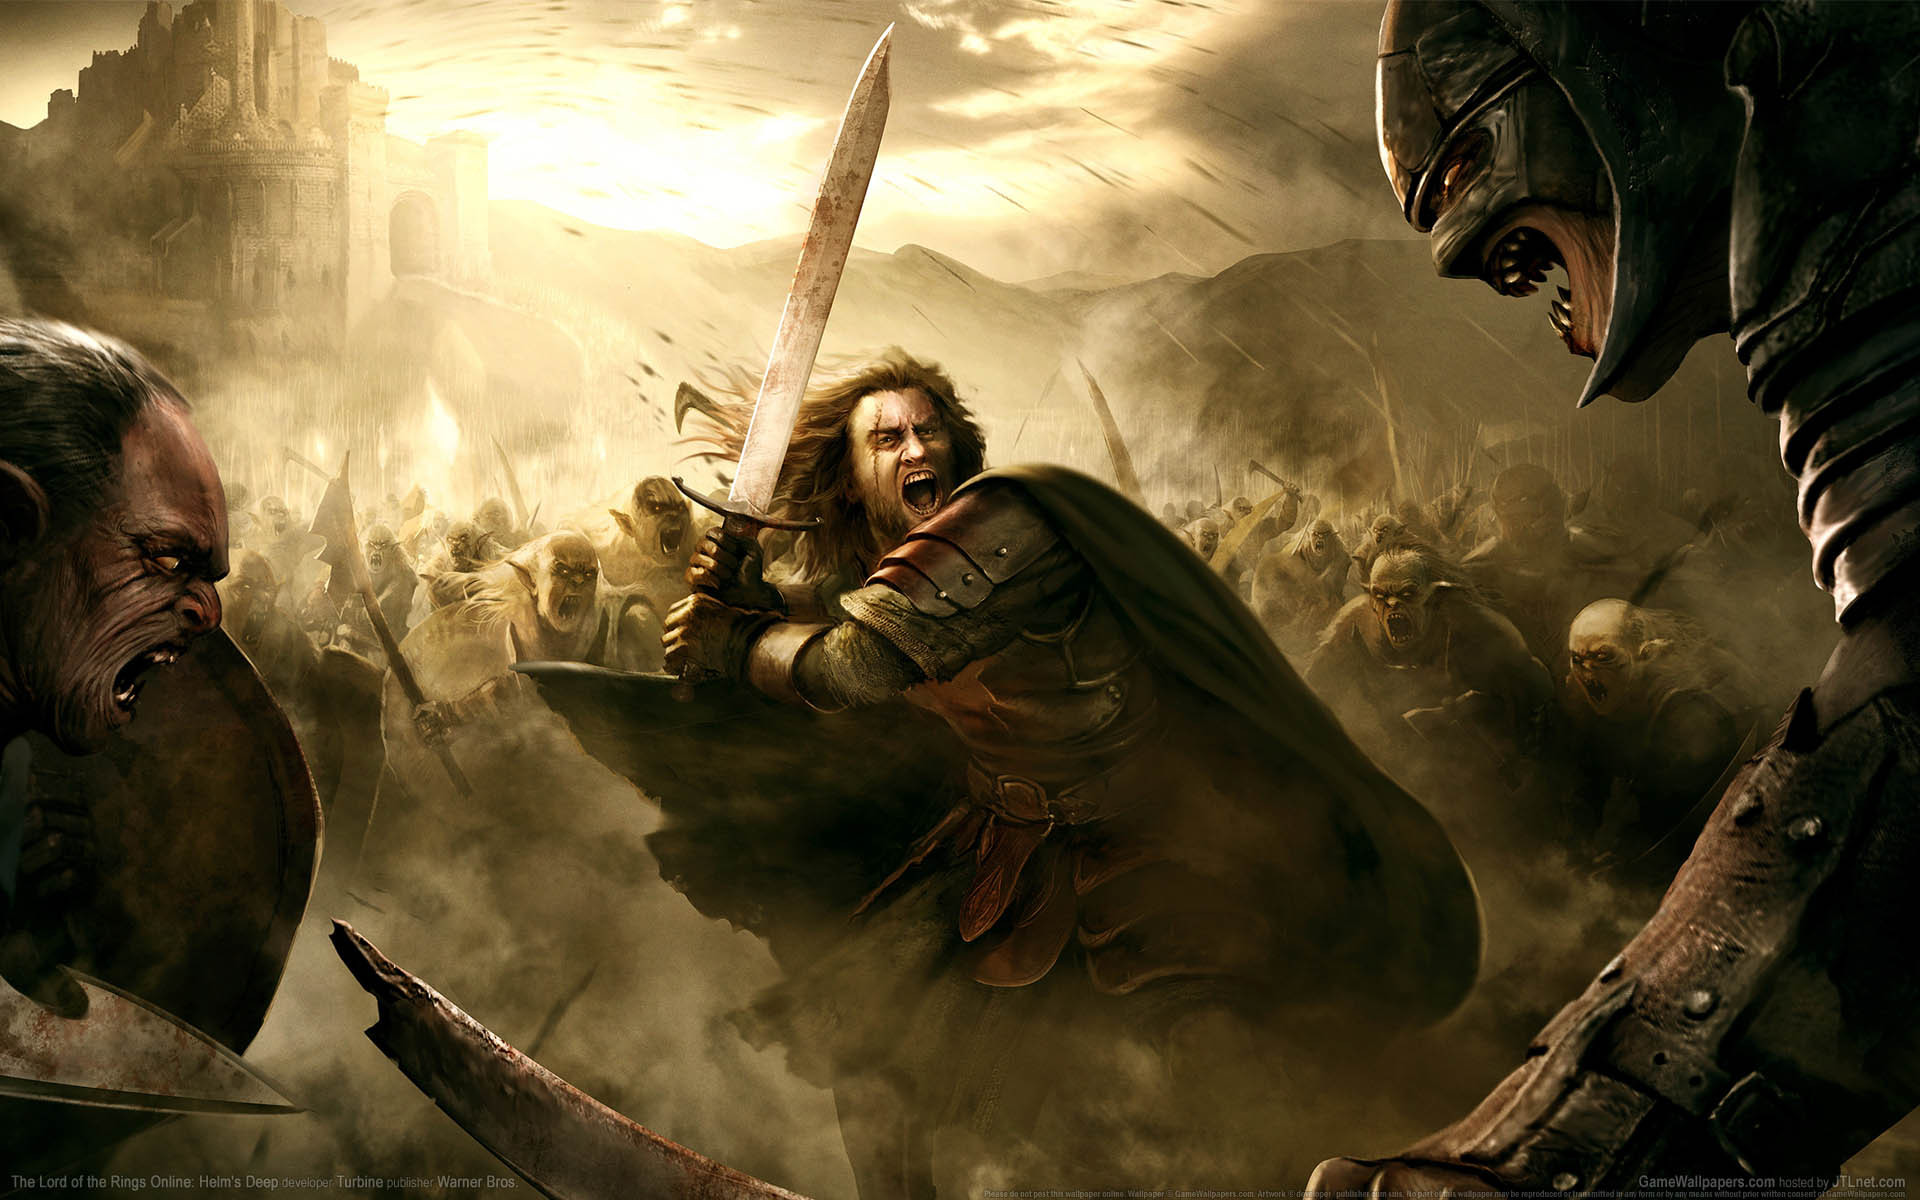 The Lord Of Rings Online Helm S Deep Lotro Game Wallpaper